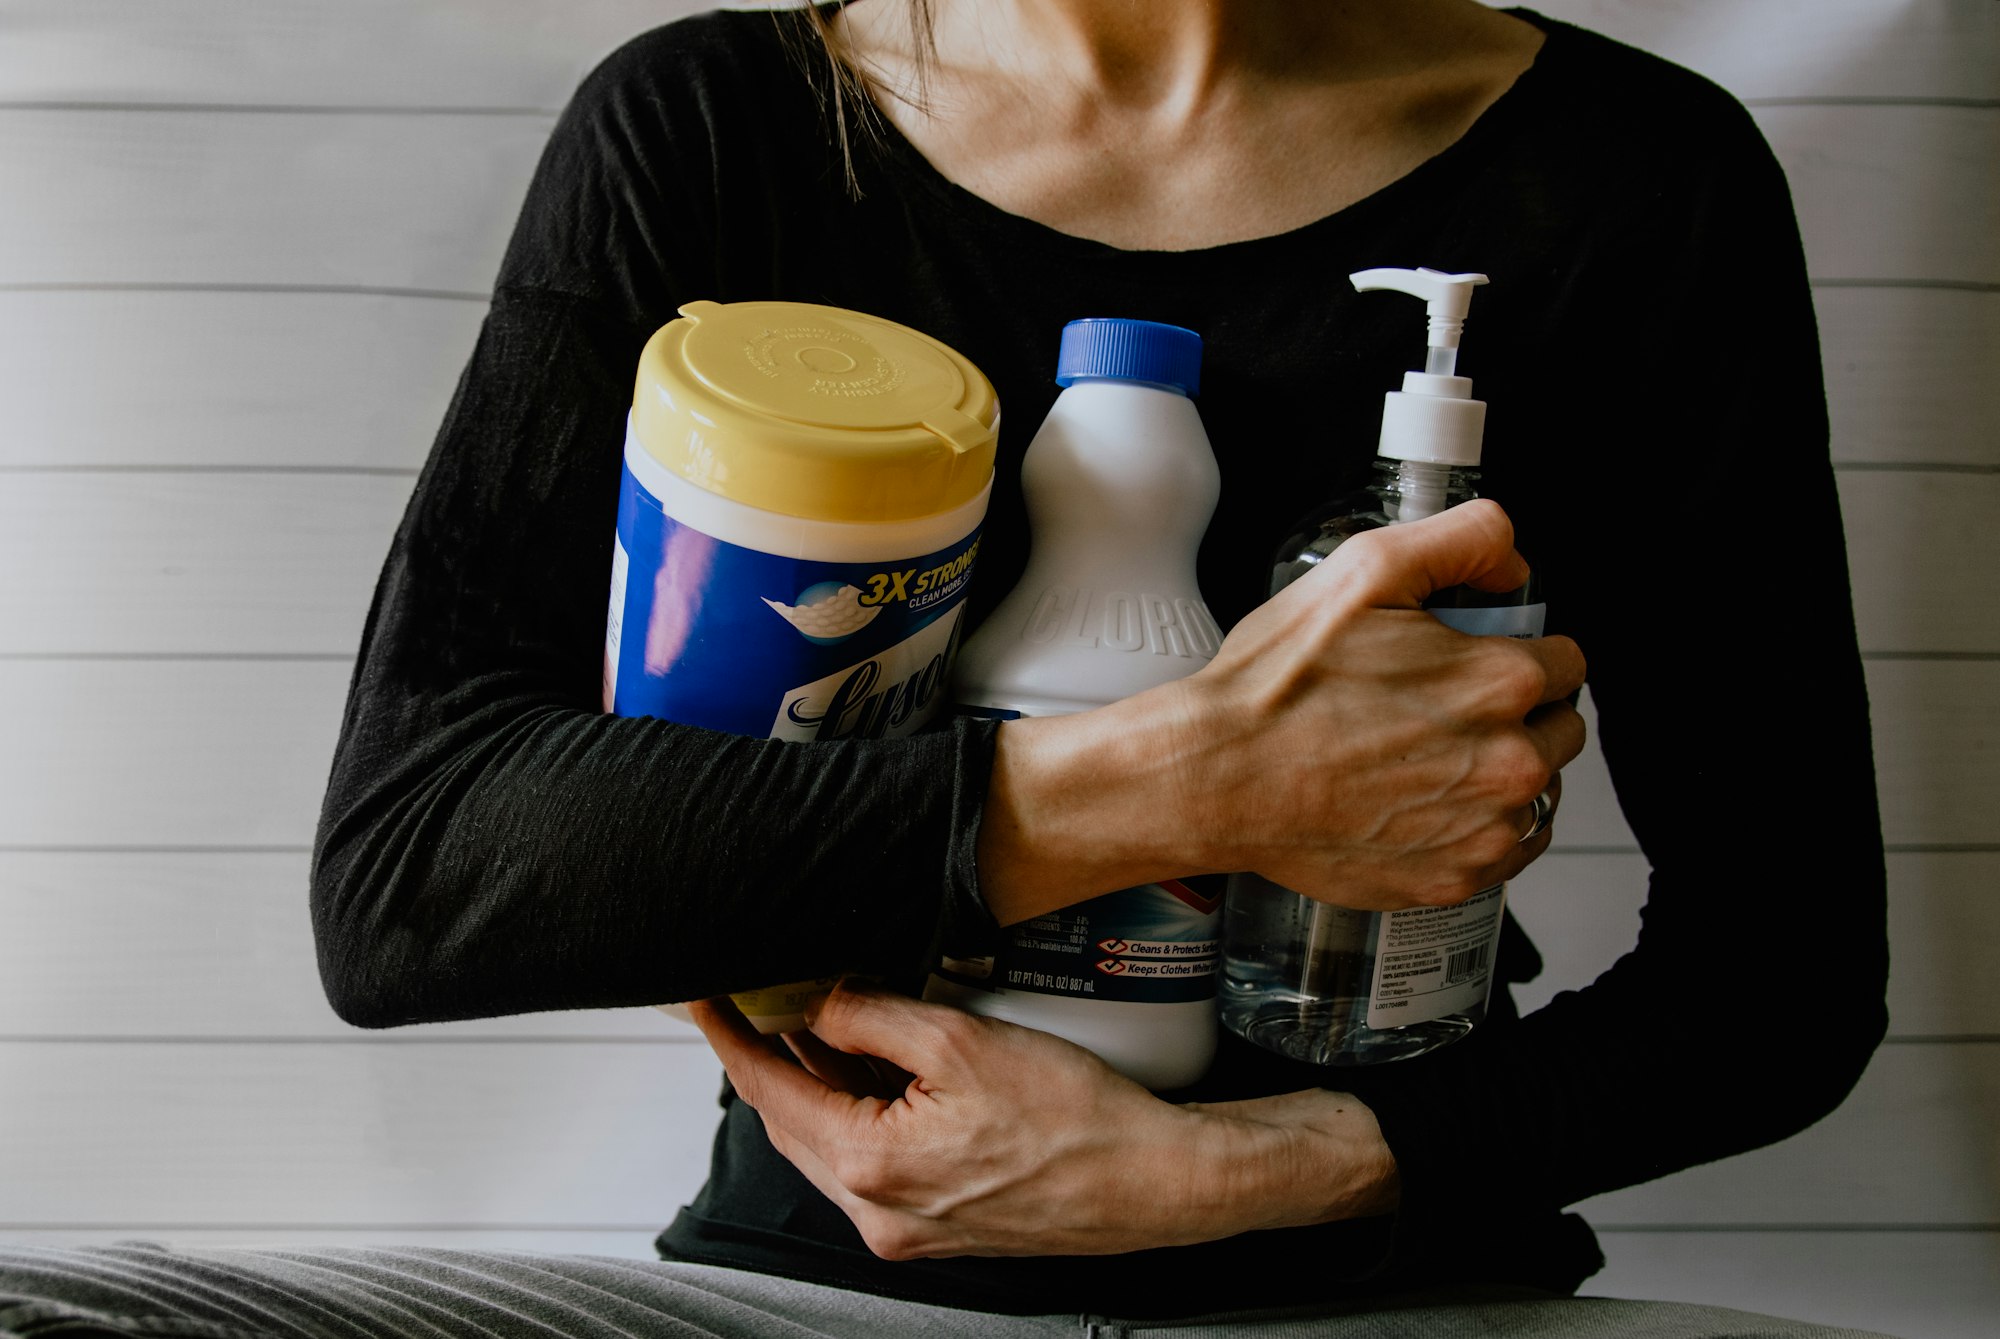 Woman gathering cleaning supplies